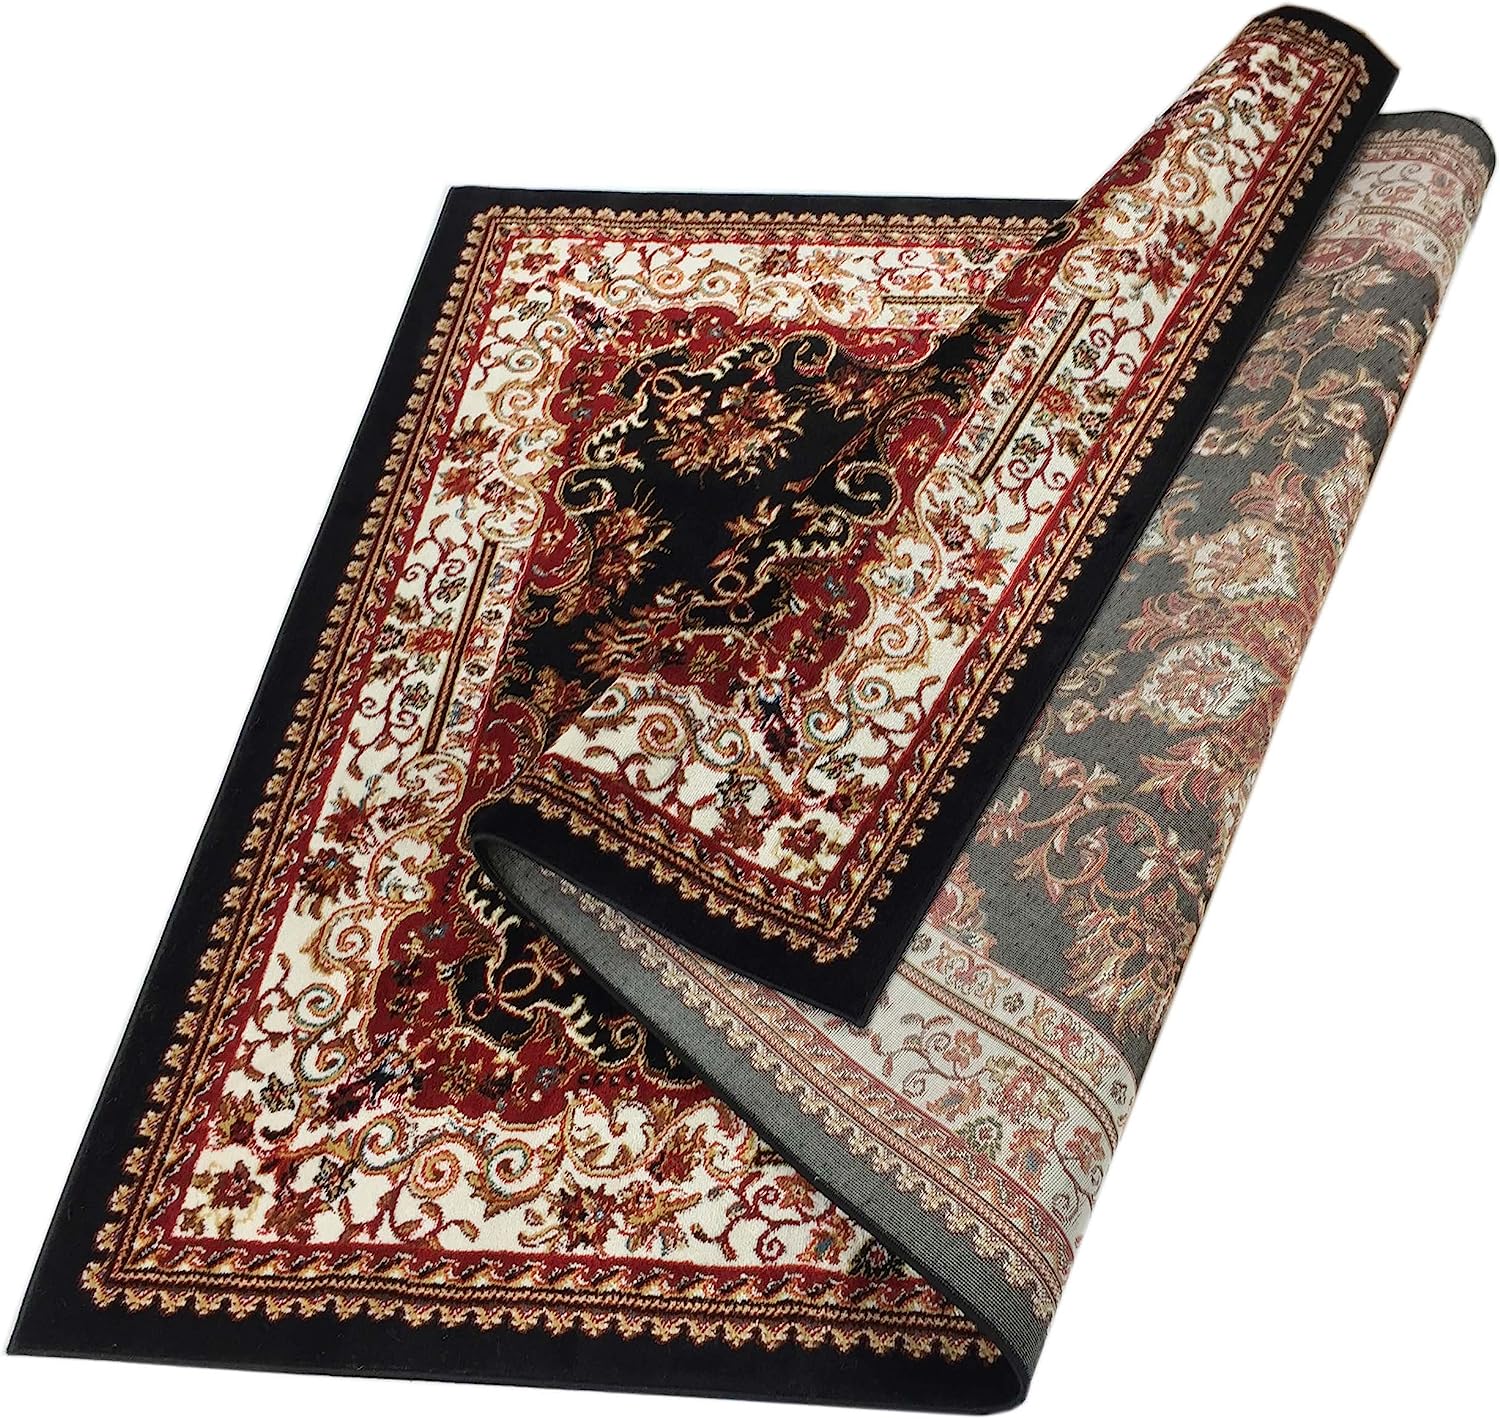 Isfahan Persian Traditional Design Area Rug Rugs (Black, 5' 3" x 7' 1")